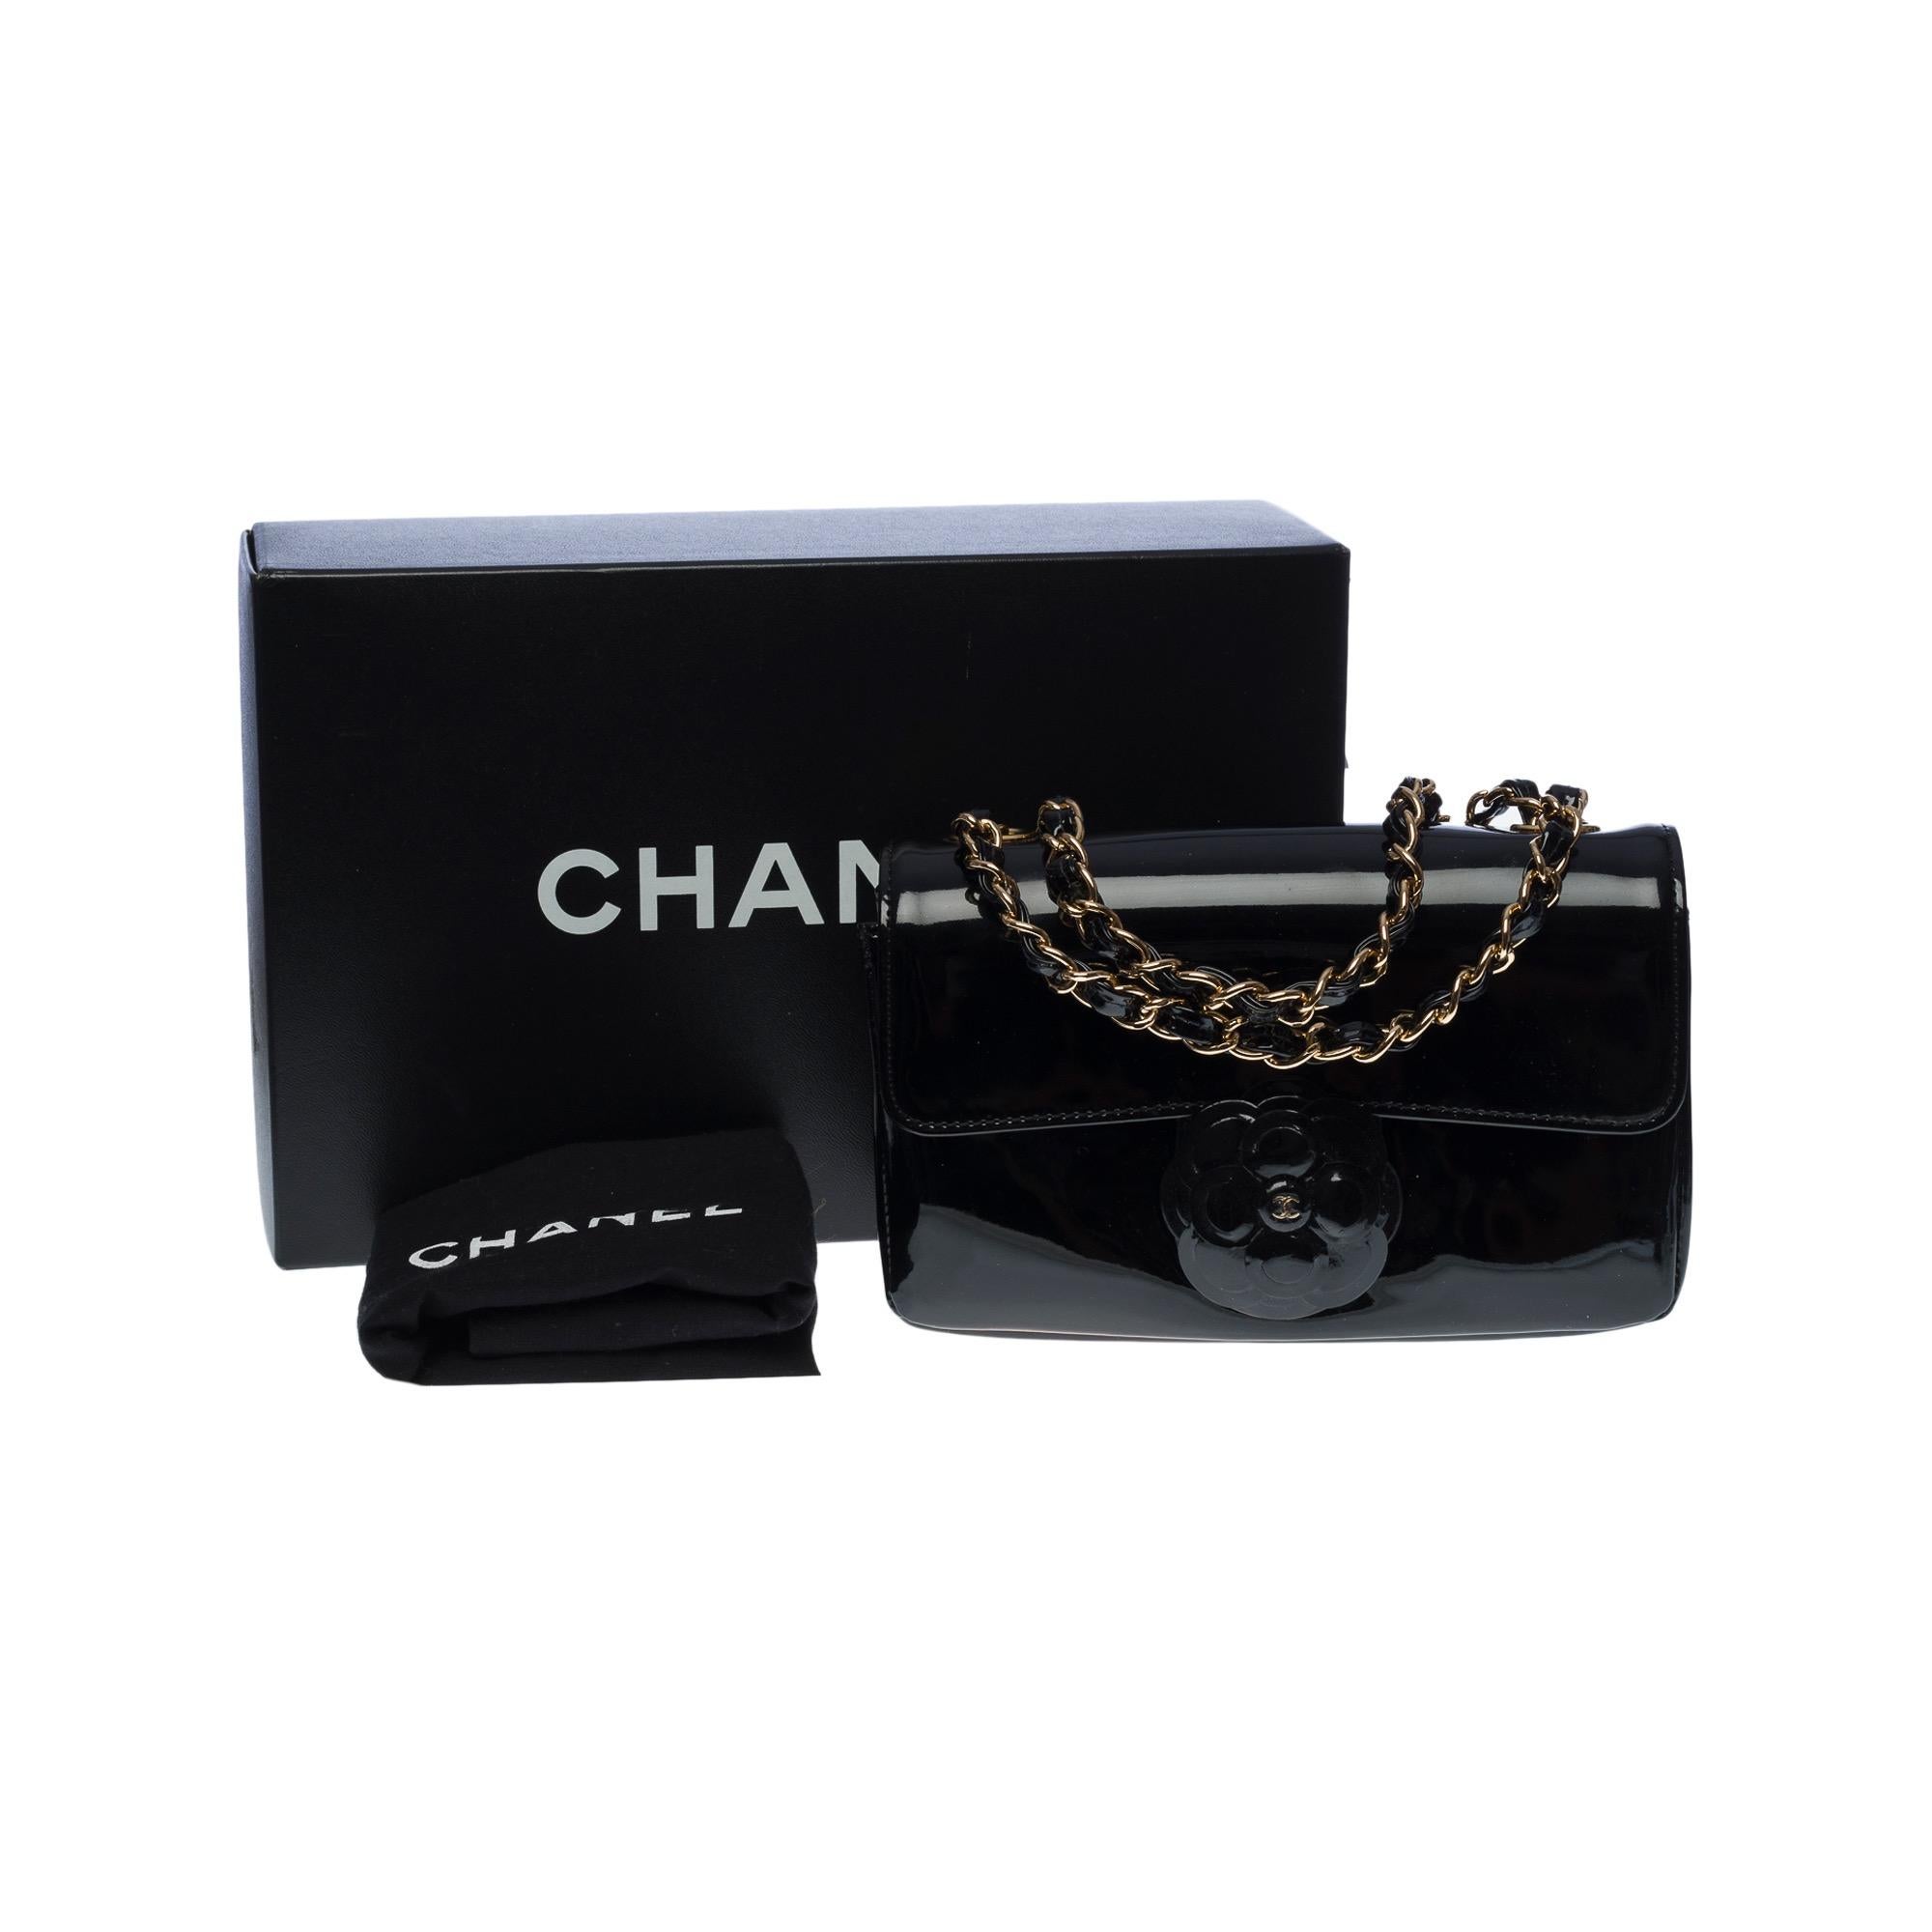 Rare Chanel Classic Timeless Camellia Mini flap bag in black patent leather, GHW 7